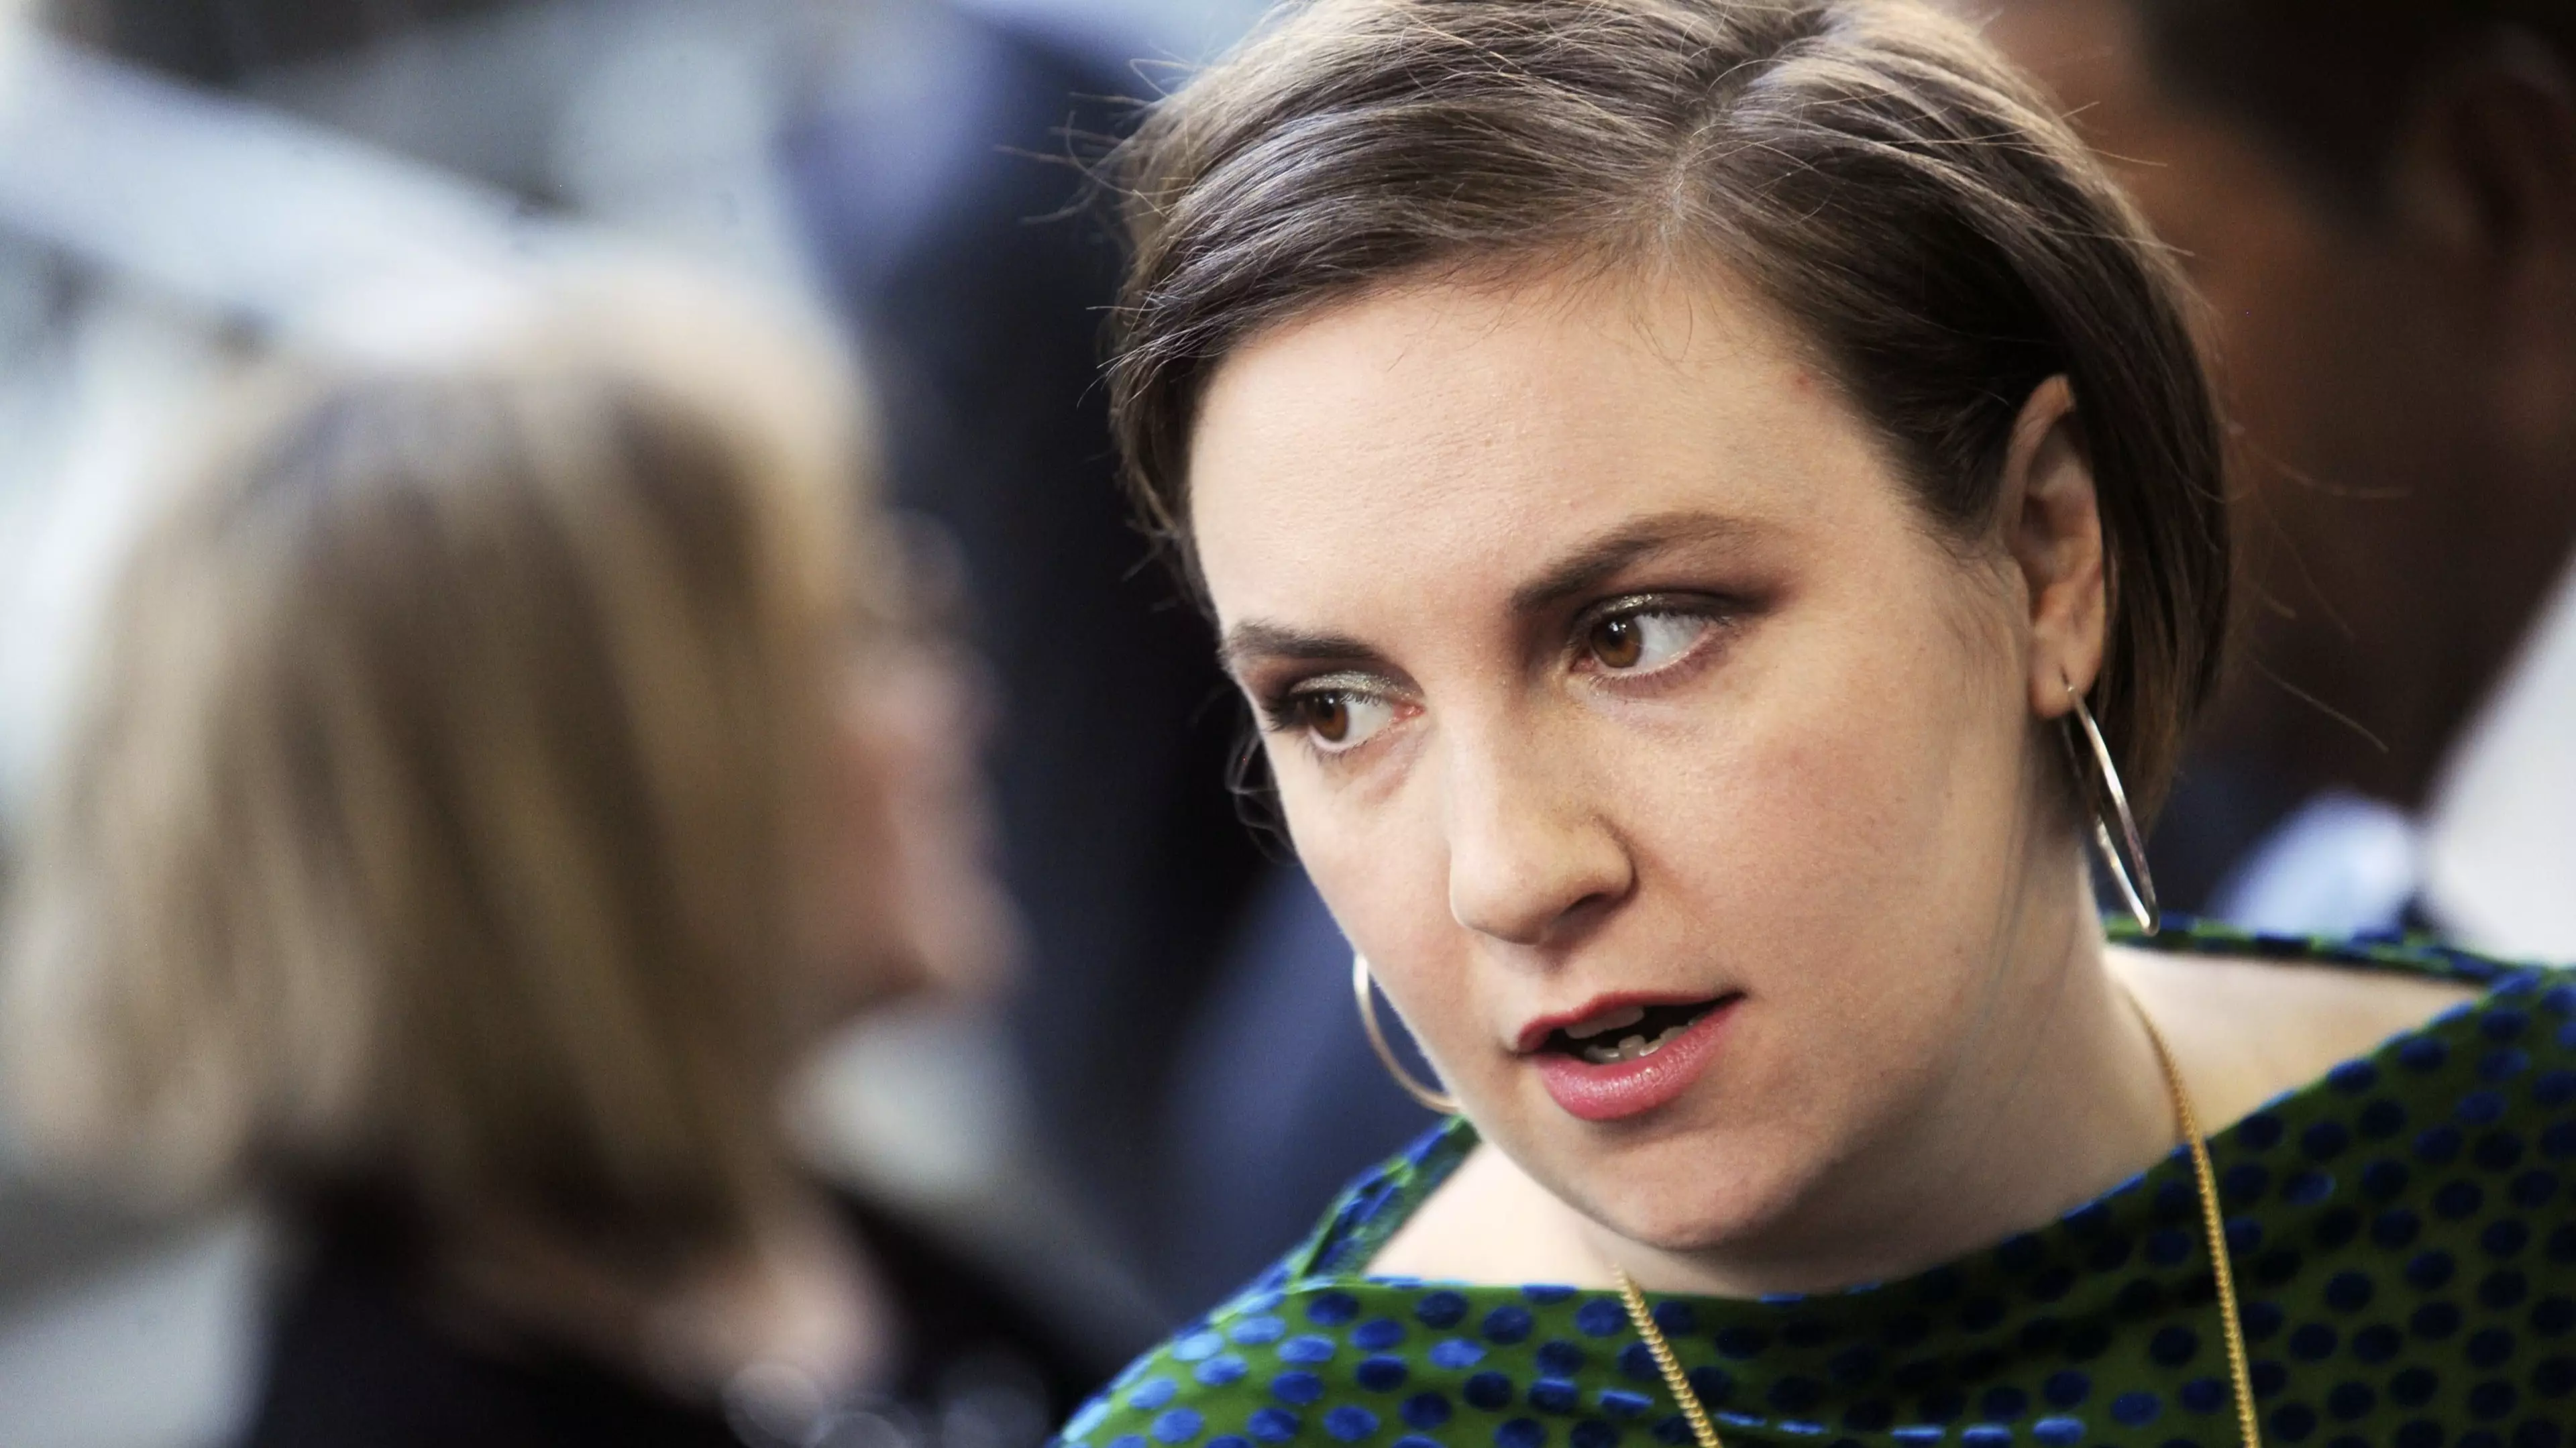 Lena Dunham Reveals She's Had Her Left Ovary Removed In Heartbreaking Post